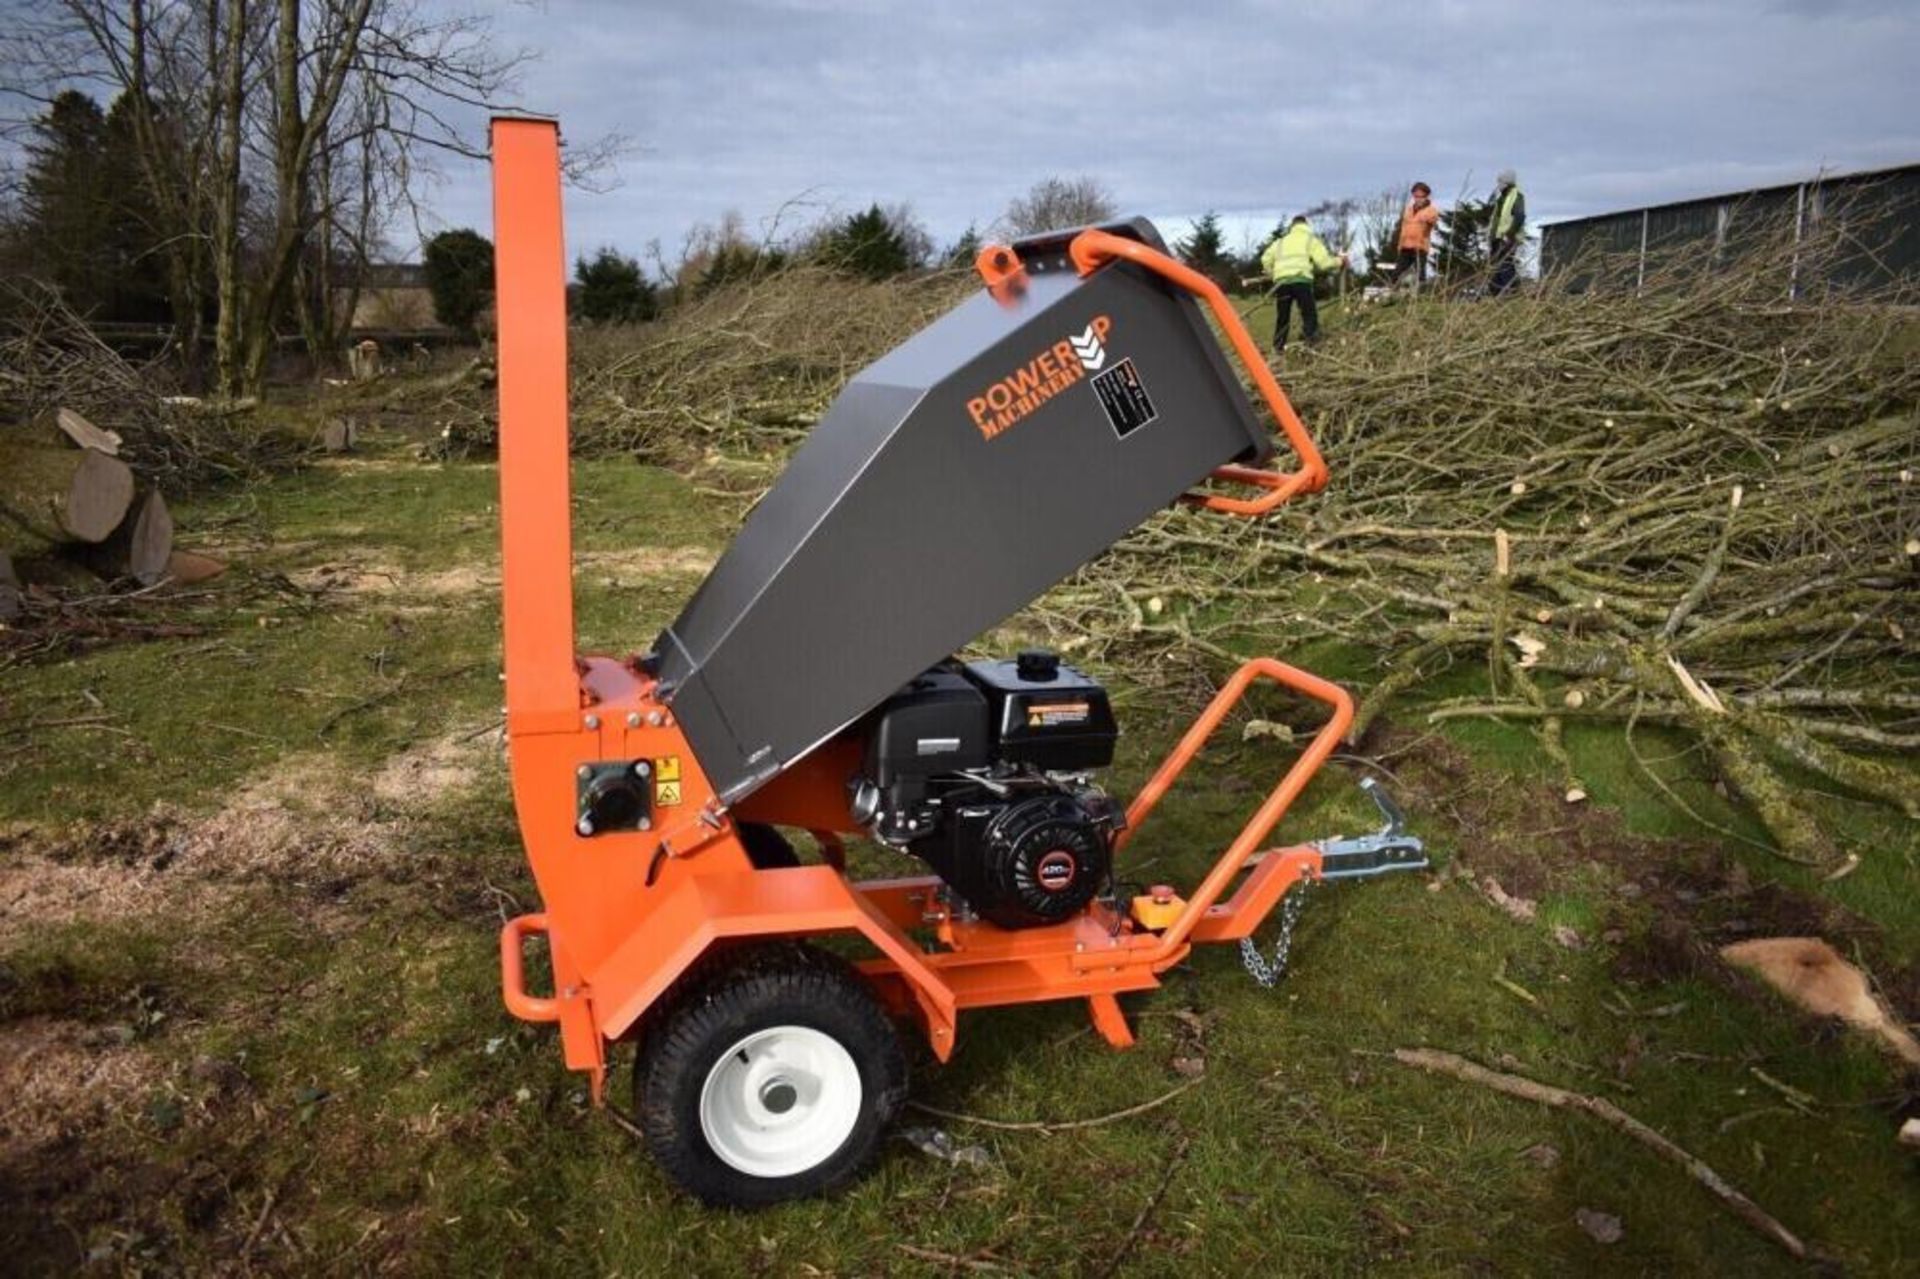 WOOD WARRIOR: 3.5" CAPACITY HEAVY-DUTY CHIPPER WITH 15HP PETROL POWER - Image 2 of 5